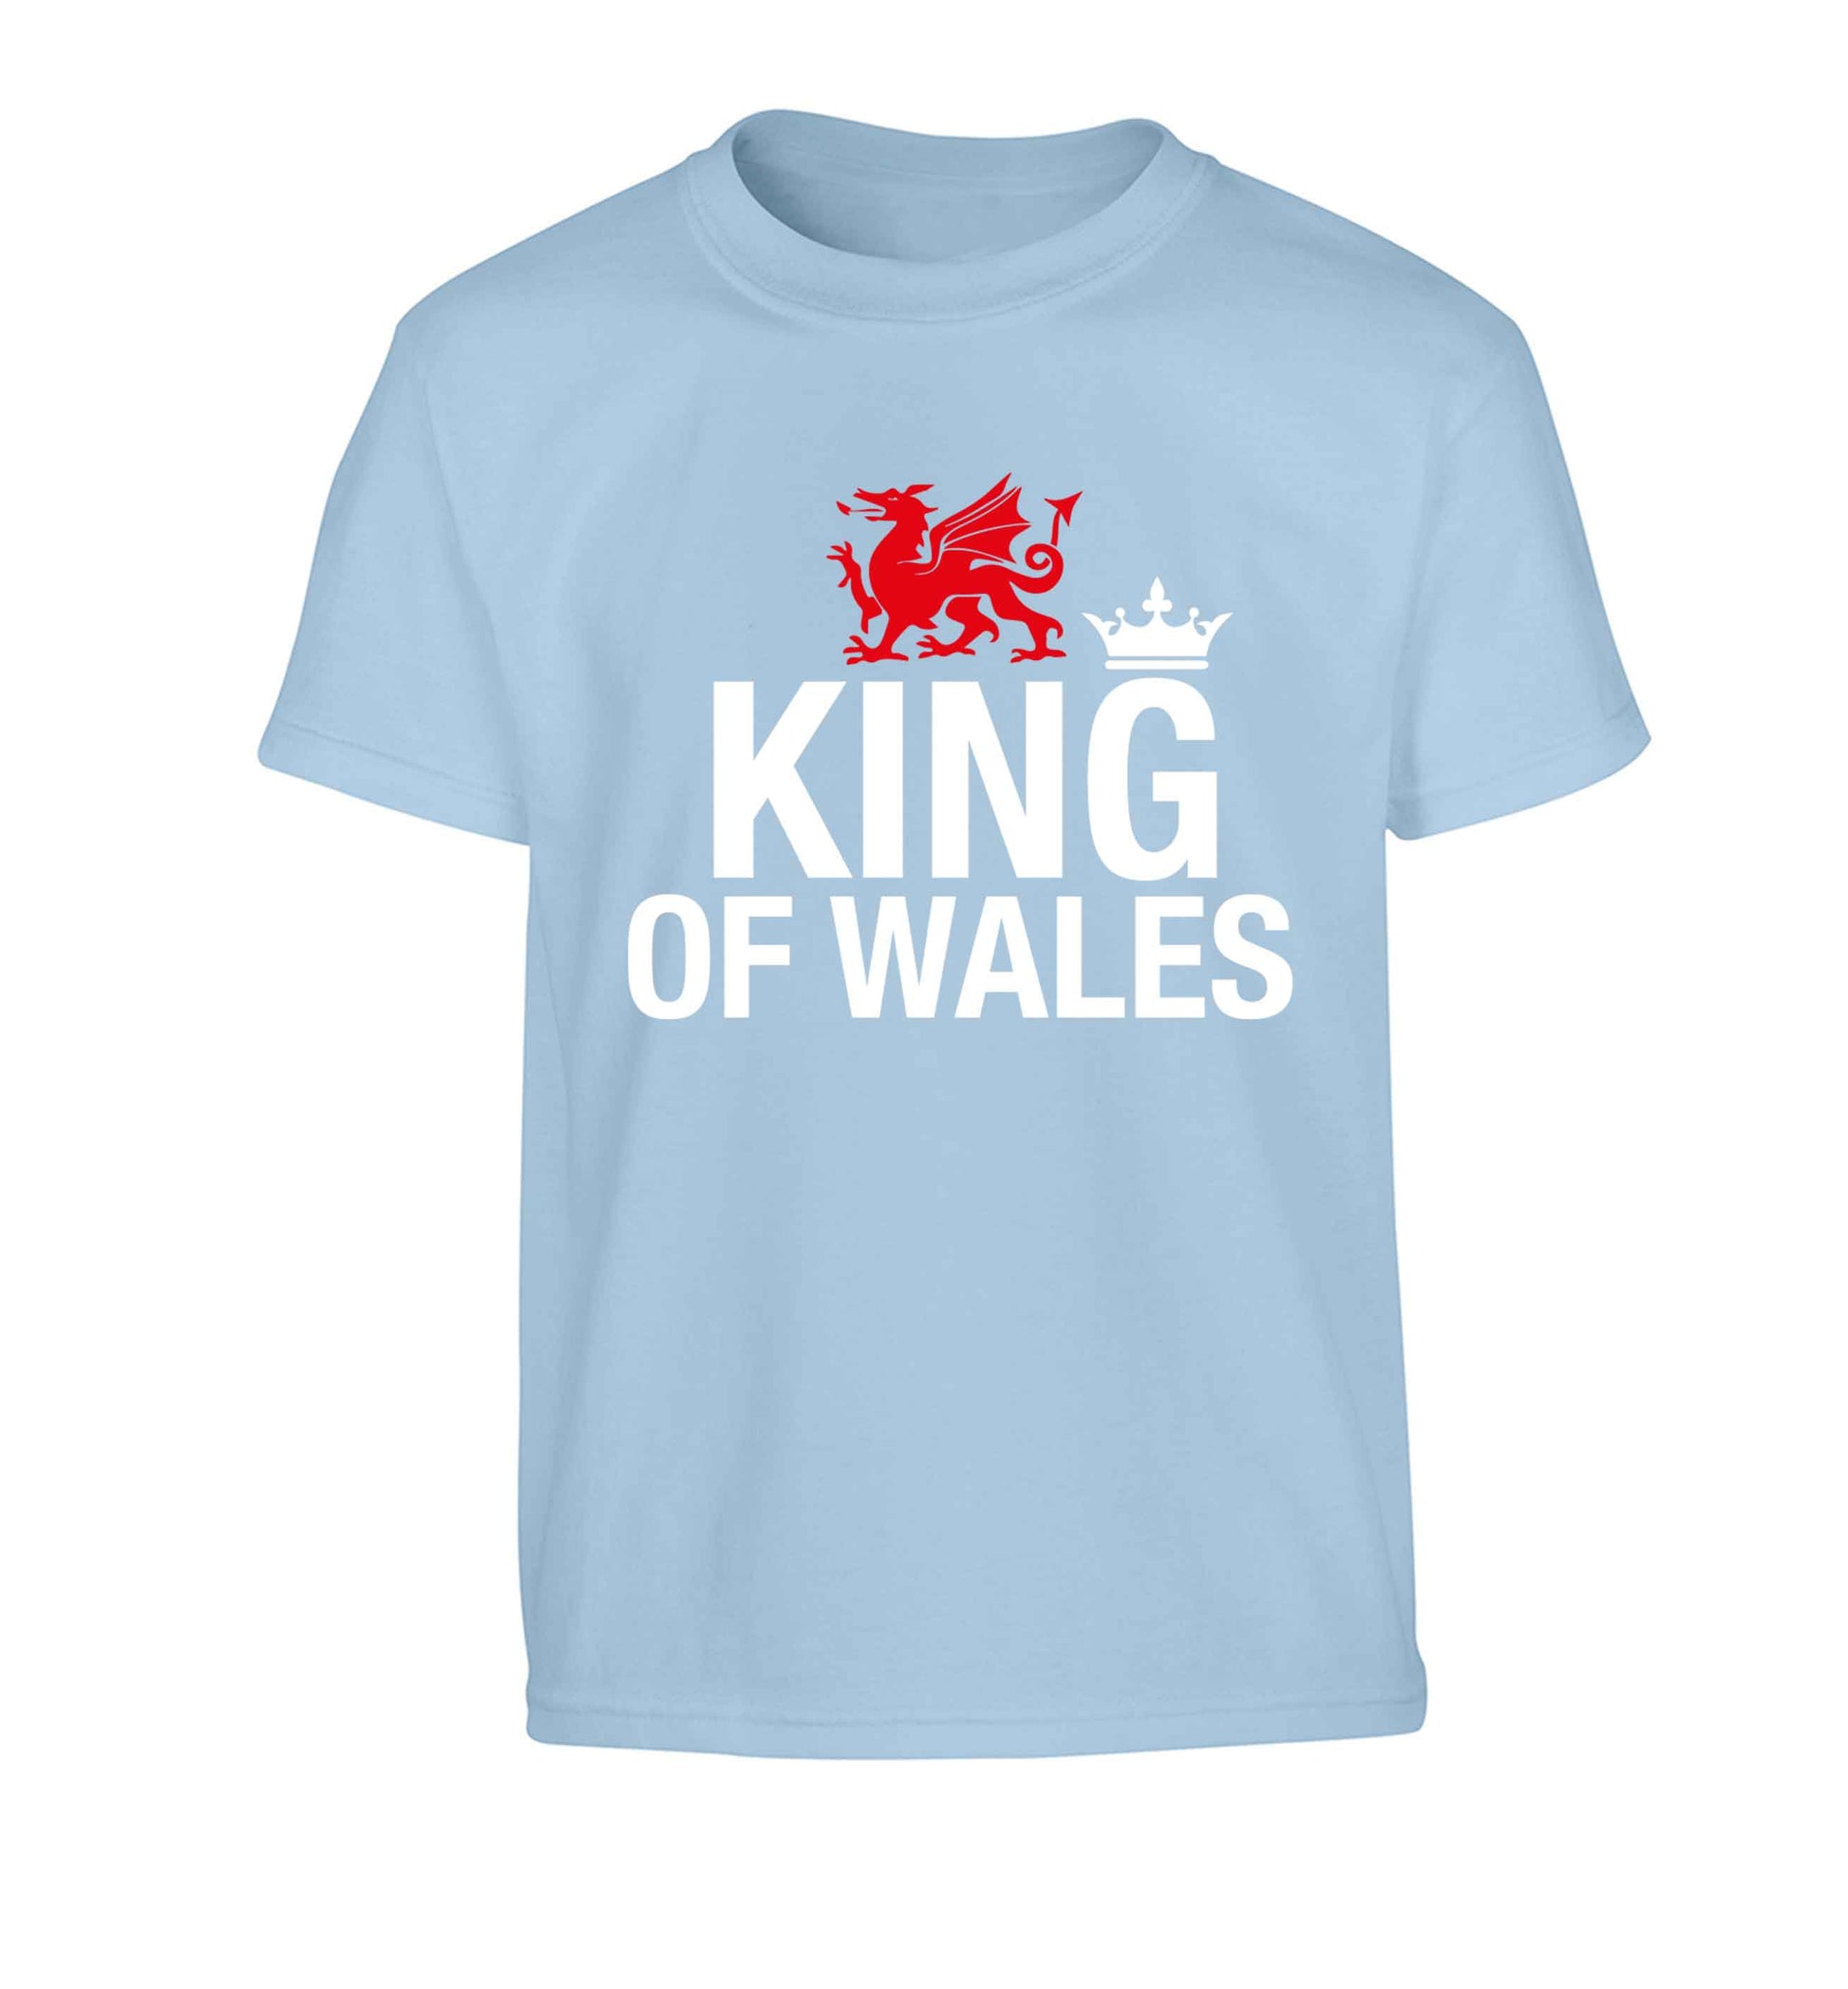 King of Wales Children's light blue Tshirt 12-13 Years